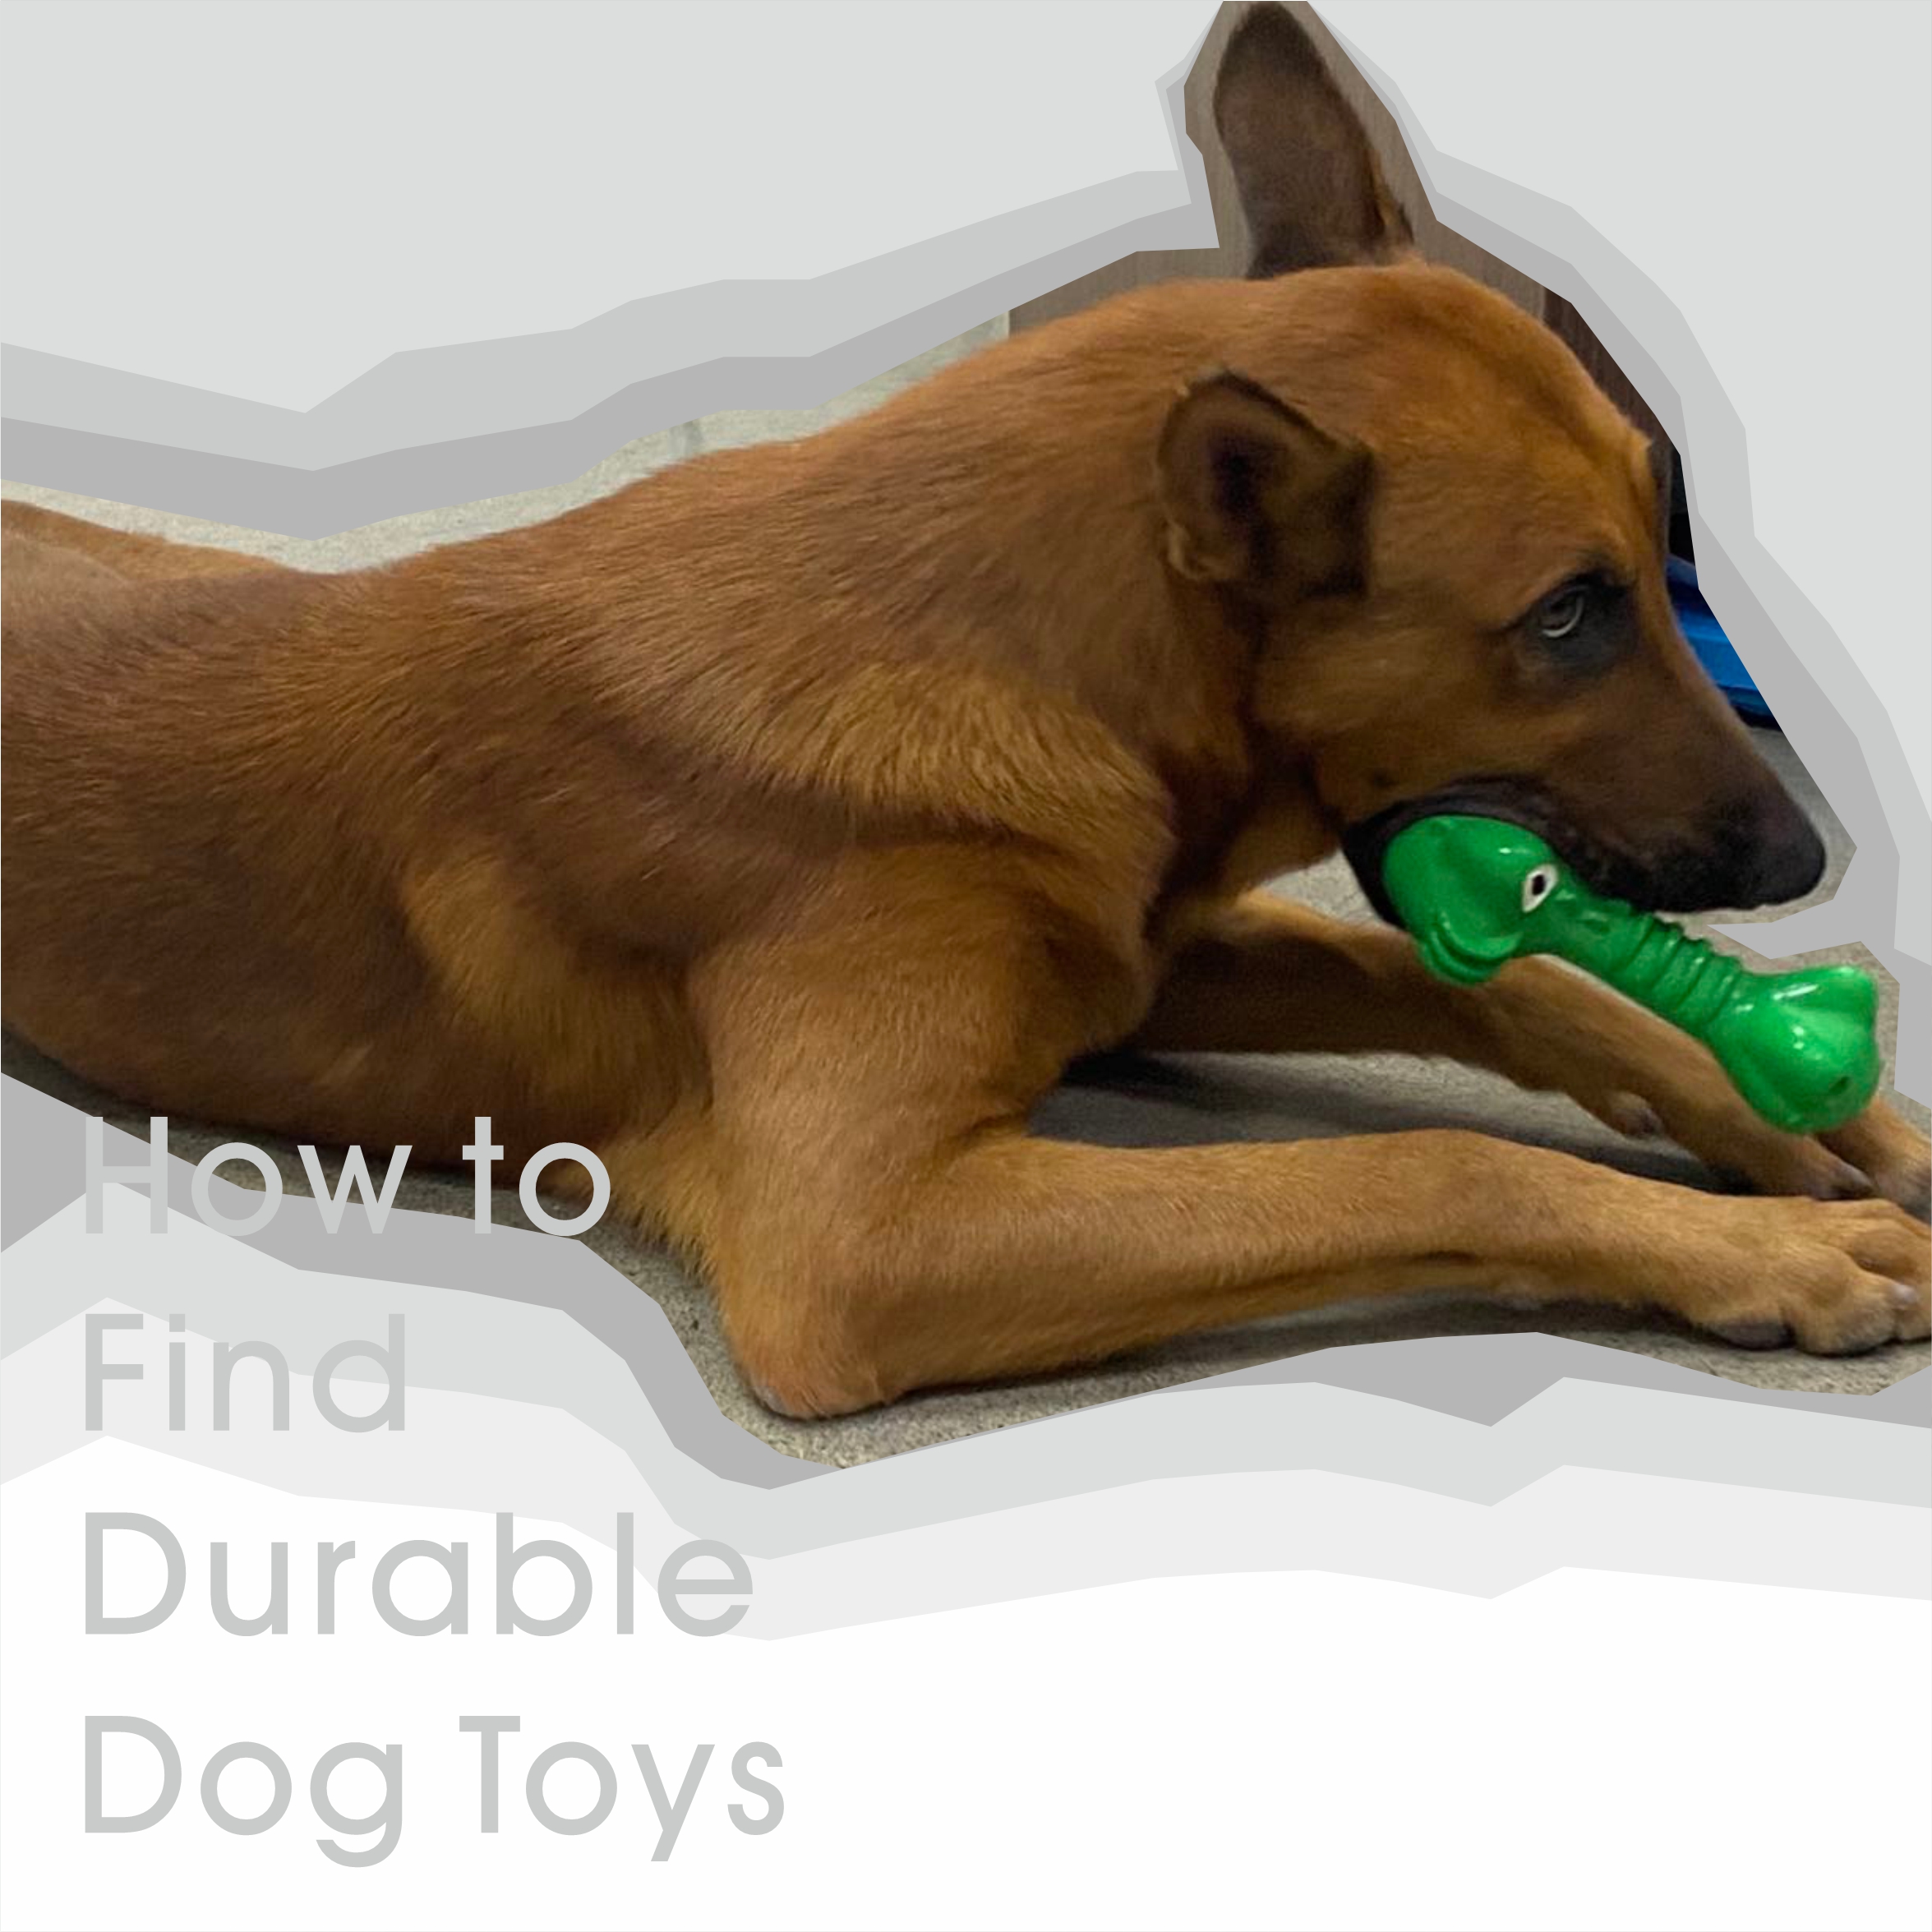 How to find durable dog toys